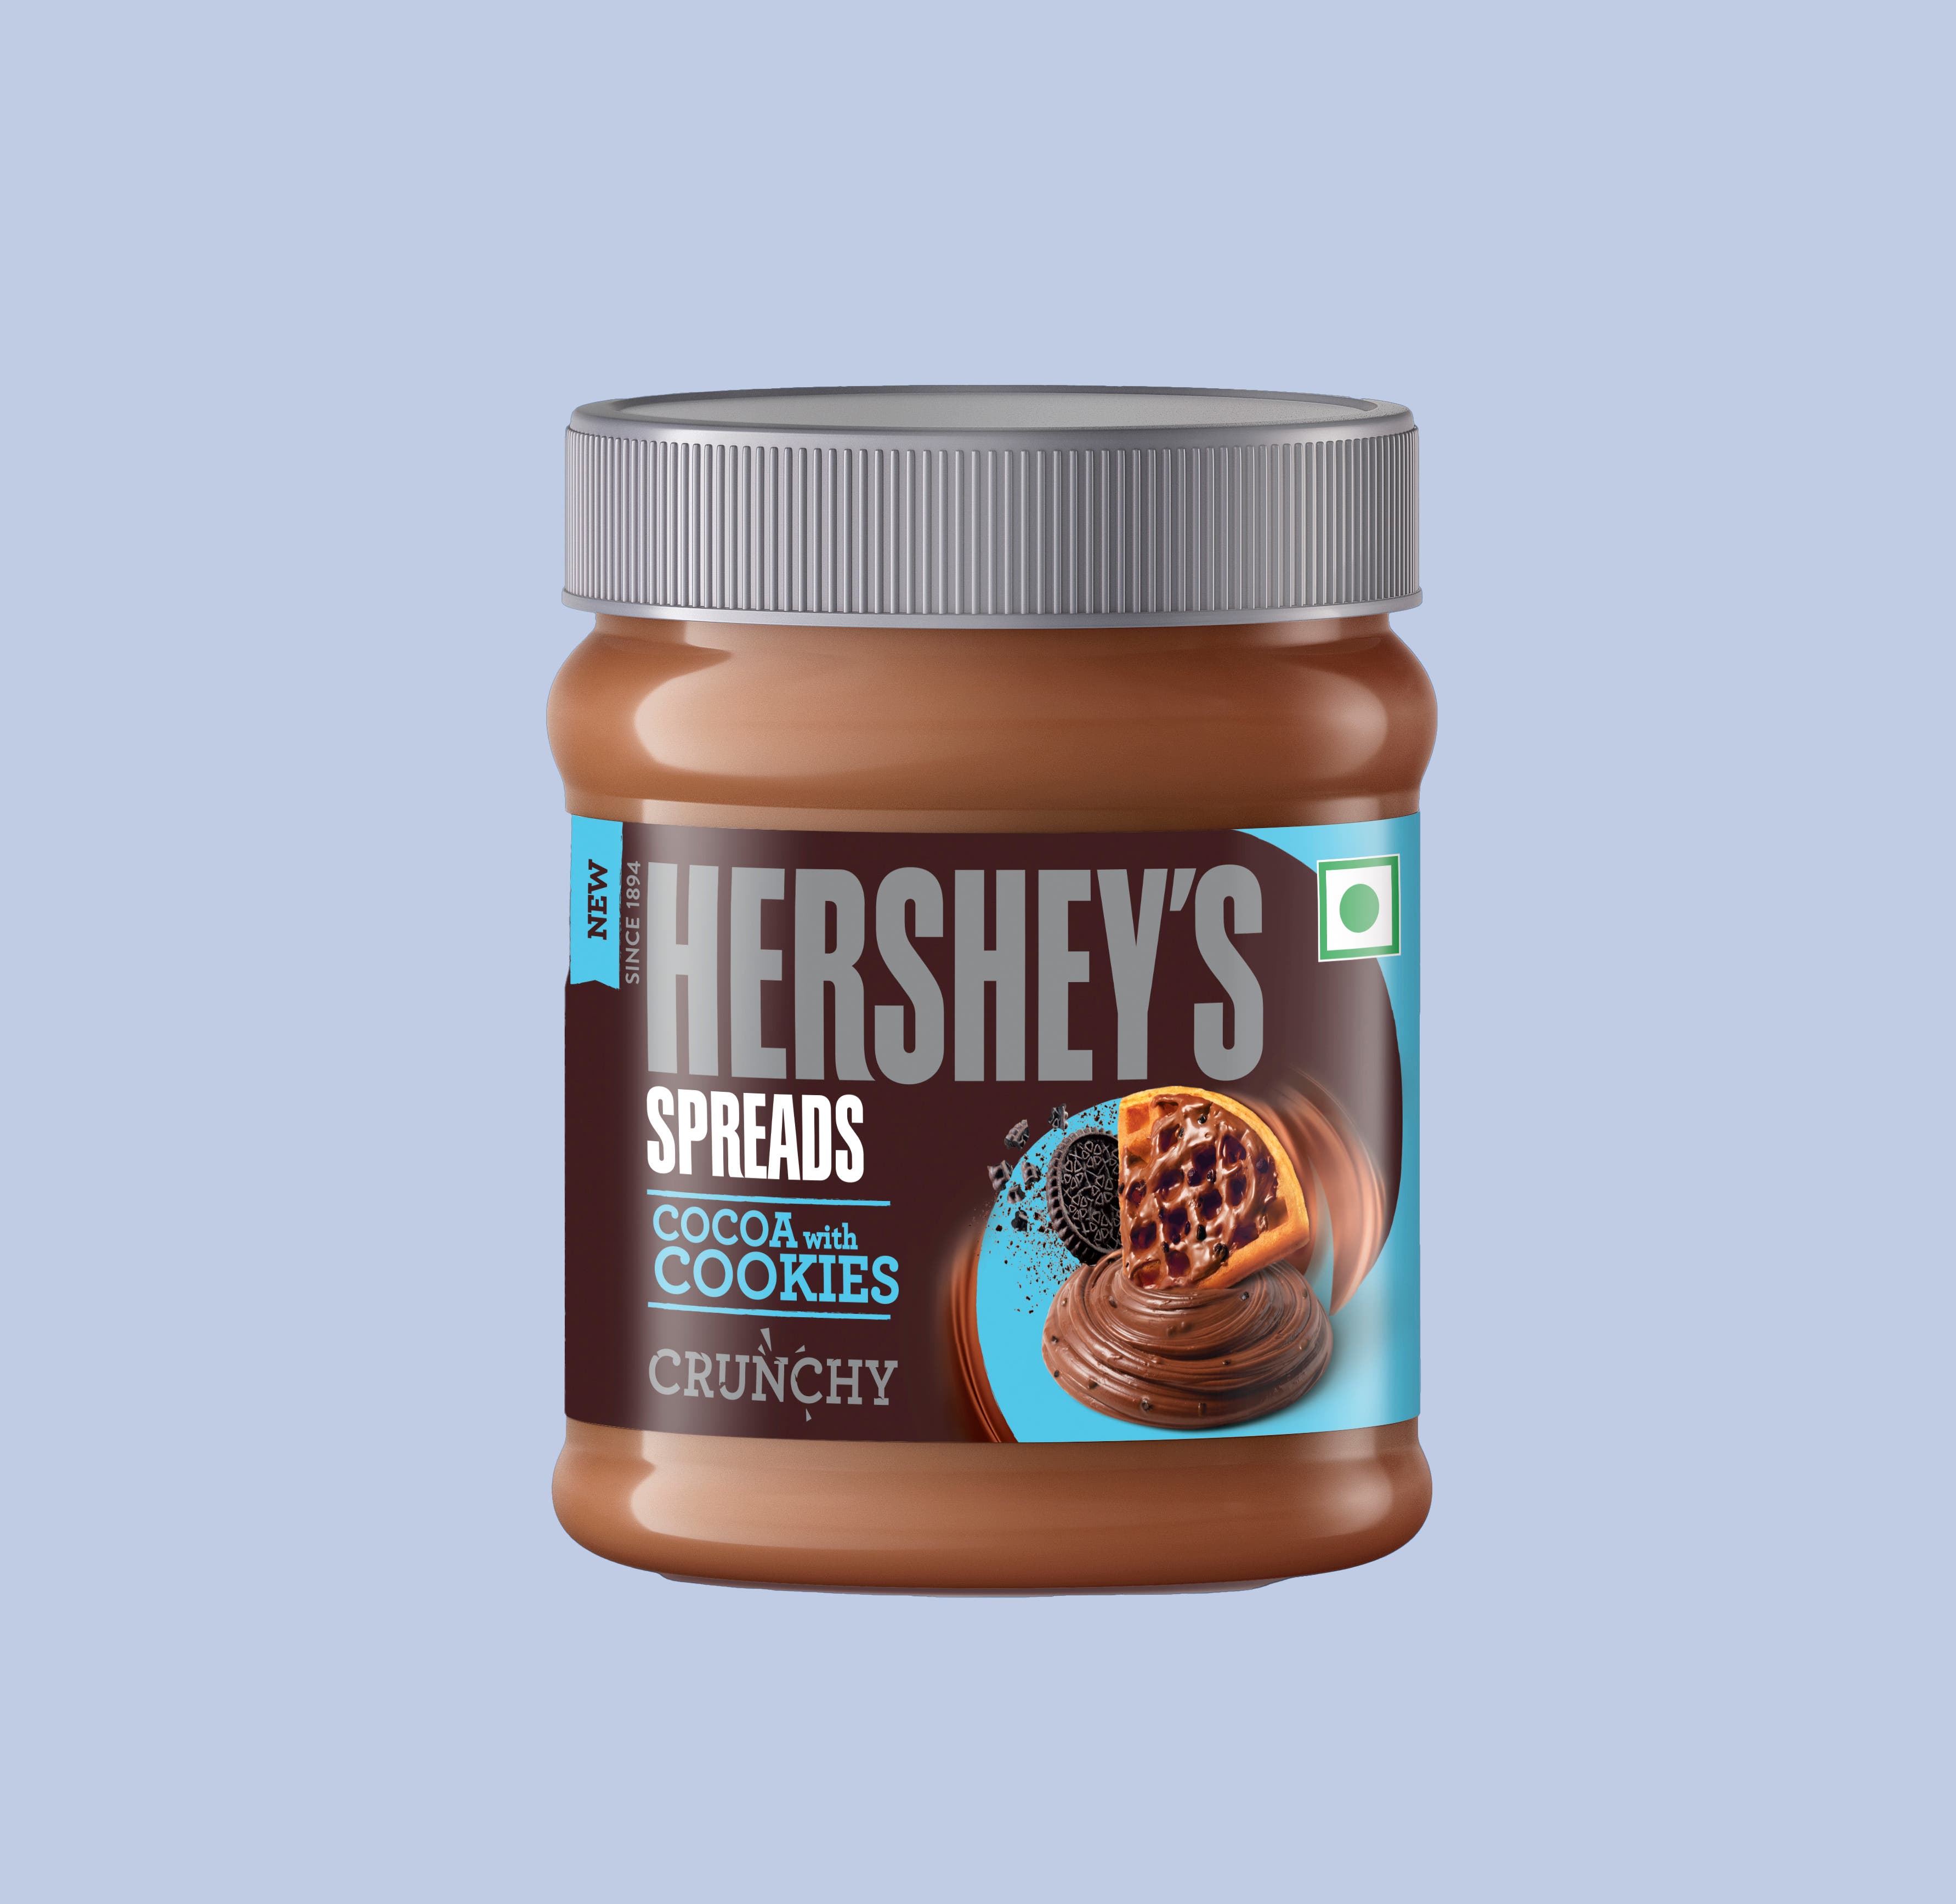 HERSHEY’S SPREADS Cocoa with Cookies, 350g